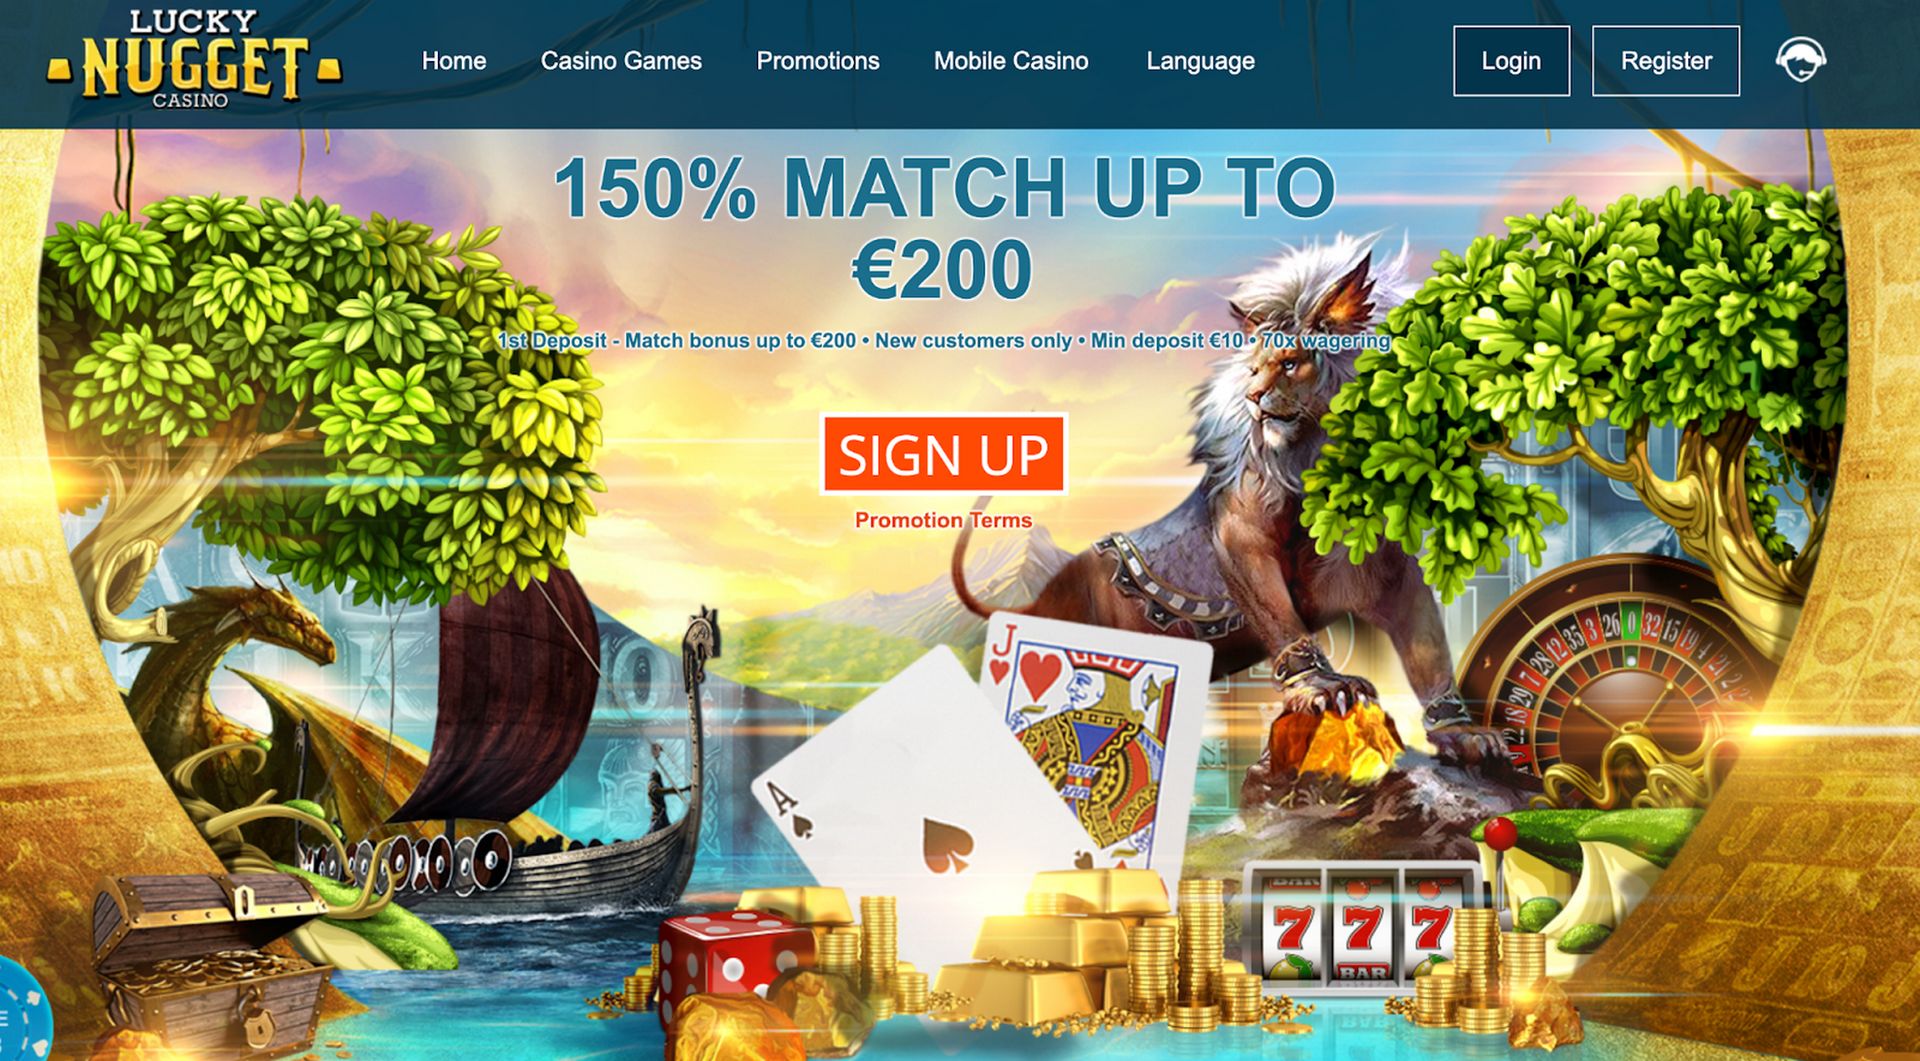 ECheck casinos uncovered: Everything you need to know